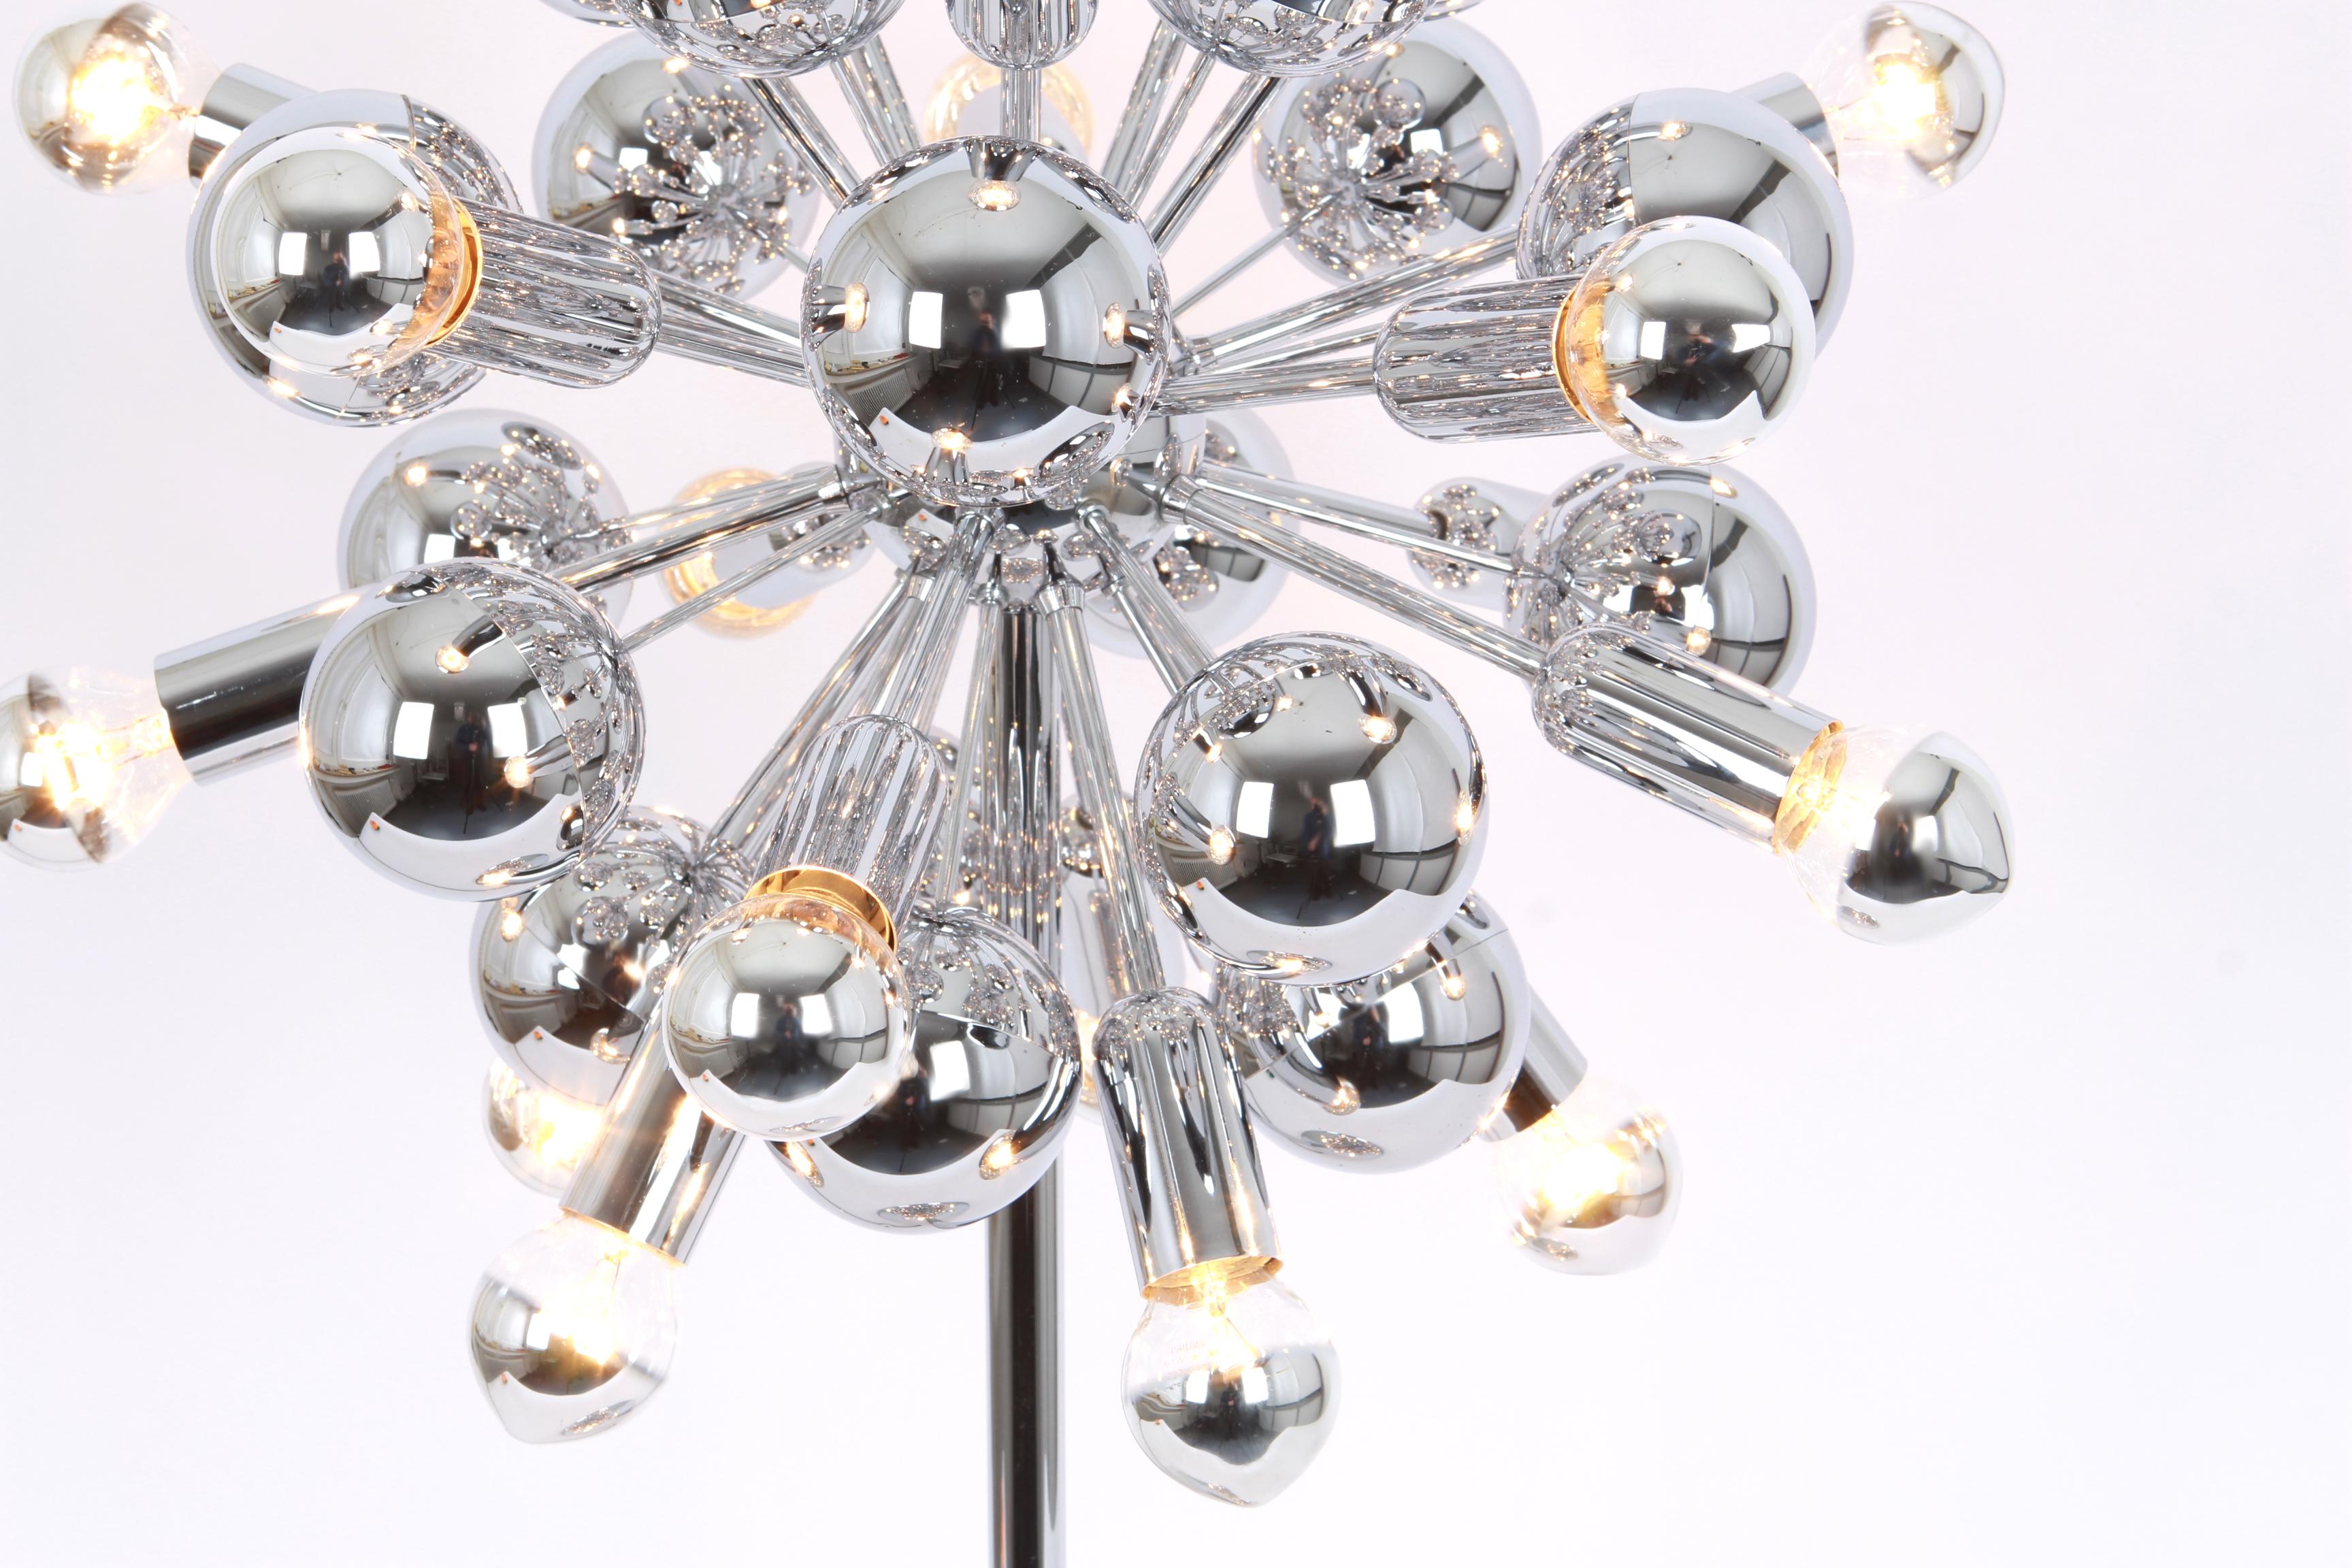 1 of 2 exclusive silver Sputnik pendant table lamp designed by Cosack during the 1970s.

Sockets: each lamp needs 21 x E14 small bulb and compatible with the US, UK, etc.. standards
Dimensions:
Diameter 16